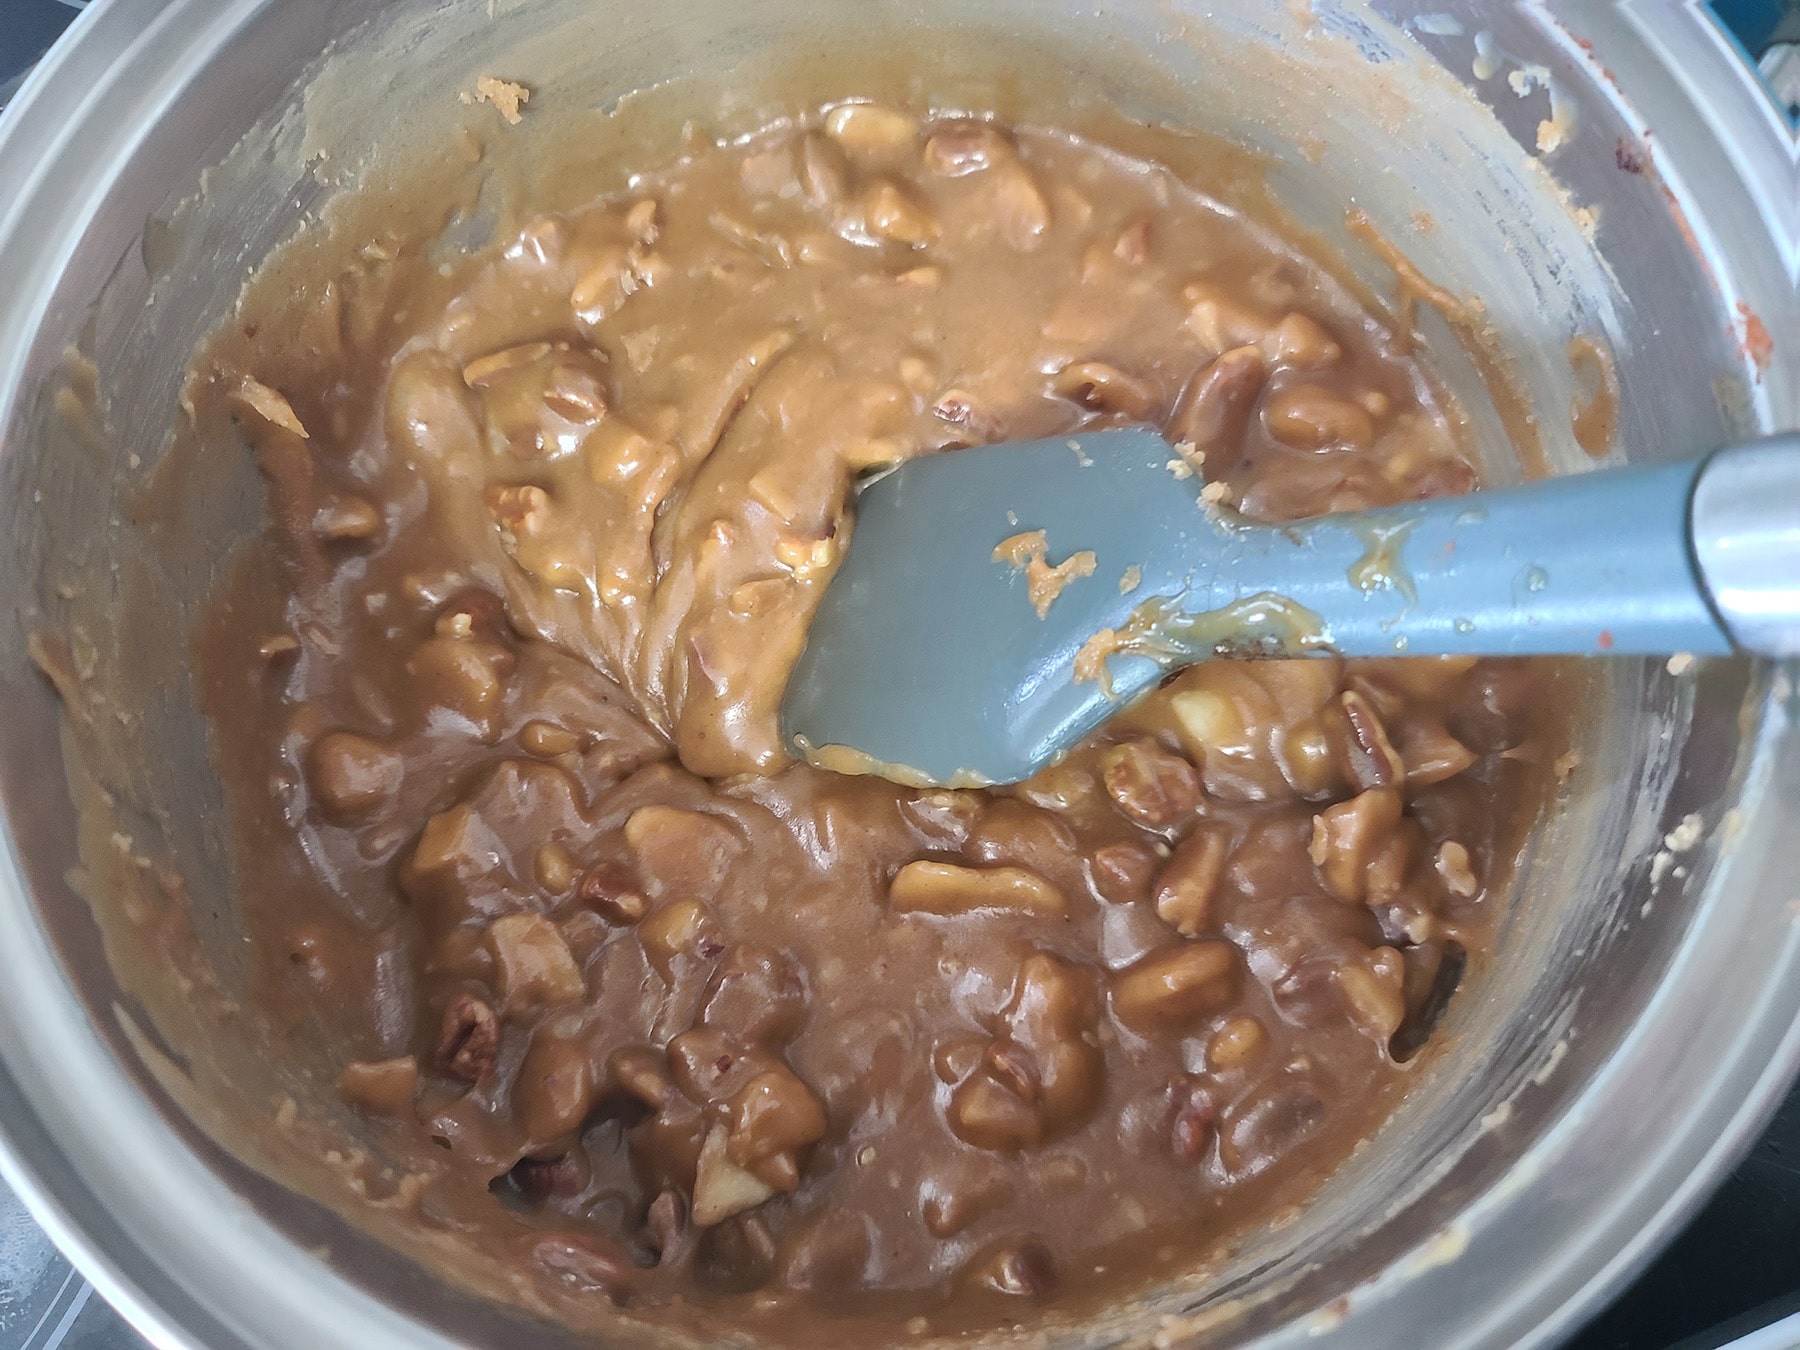 A silicone spatula being used to stir the praline mixture.